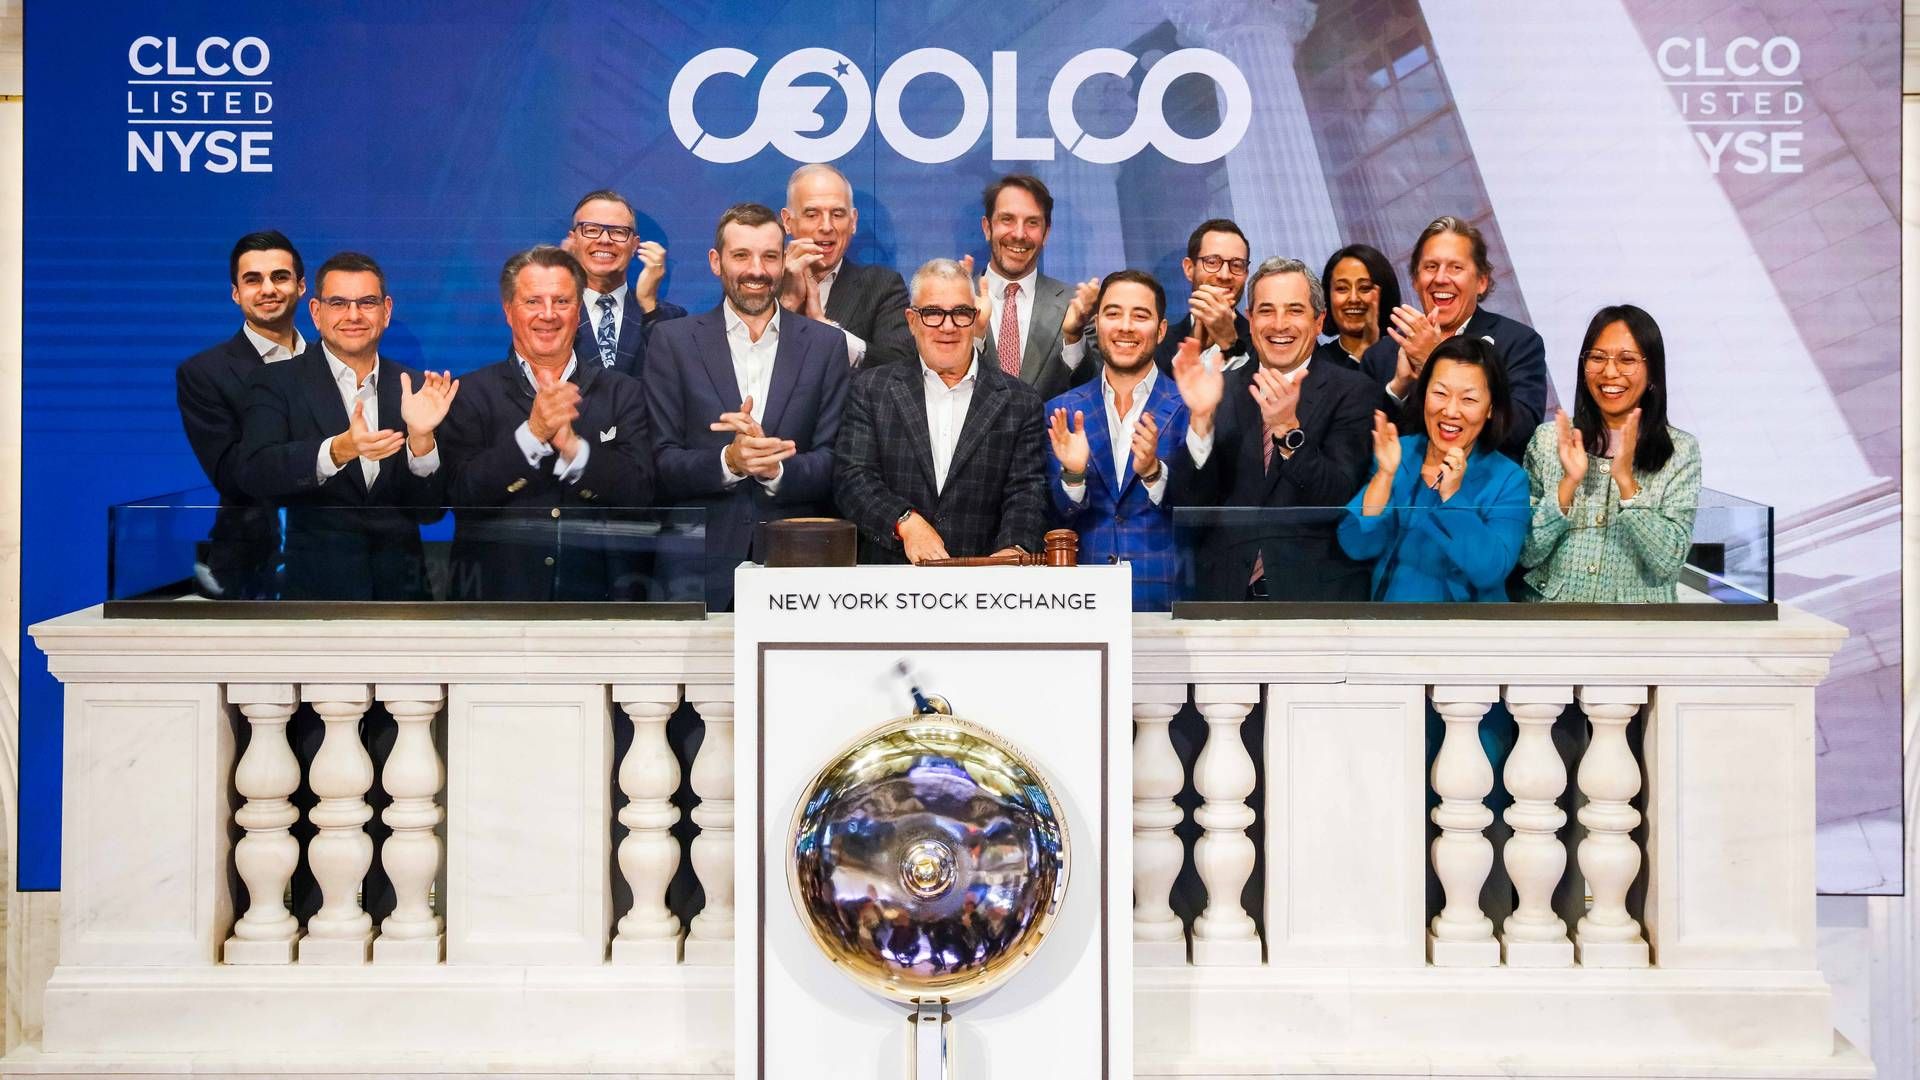 Idan Ofer rings the bell at the New York Stock Exchange in March this year, marking the IPO of Cool Company. | Photo: Pr-foto